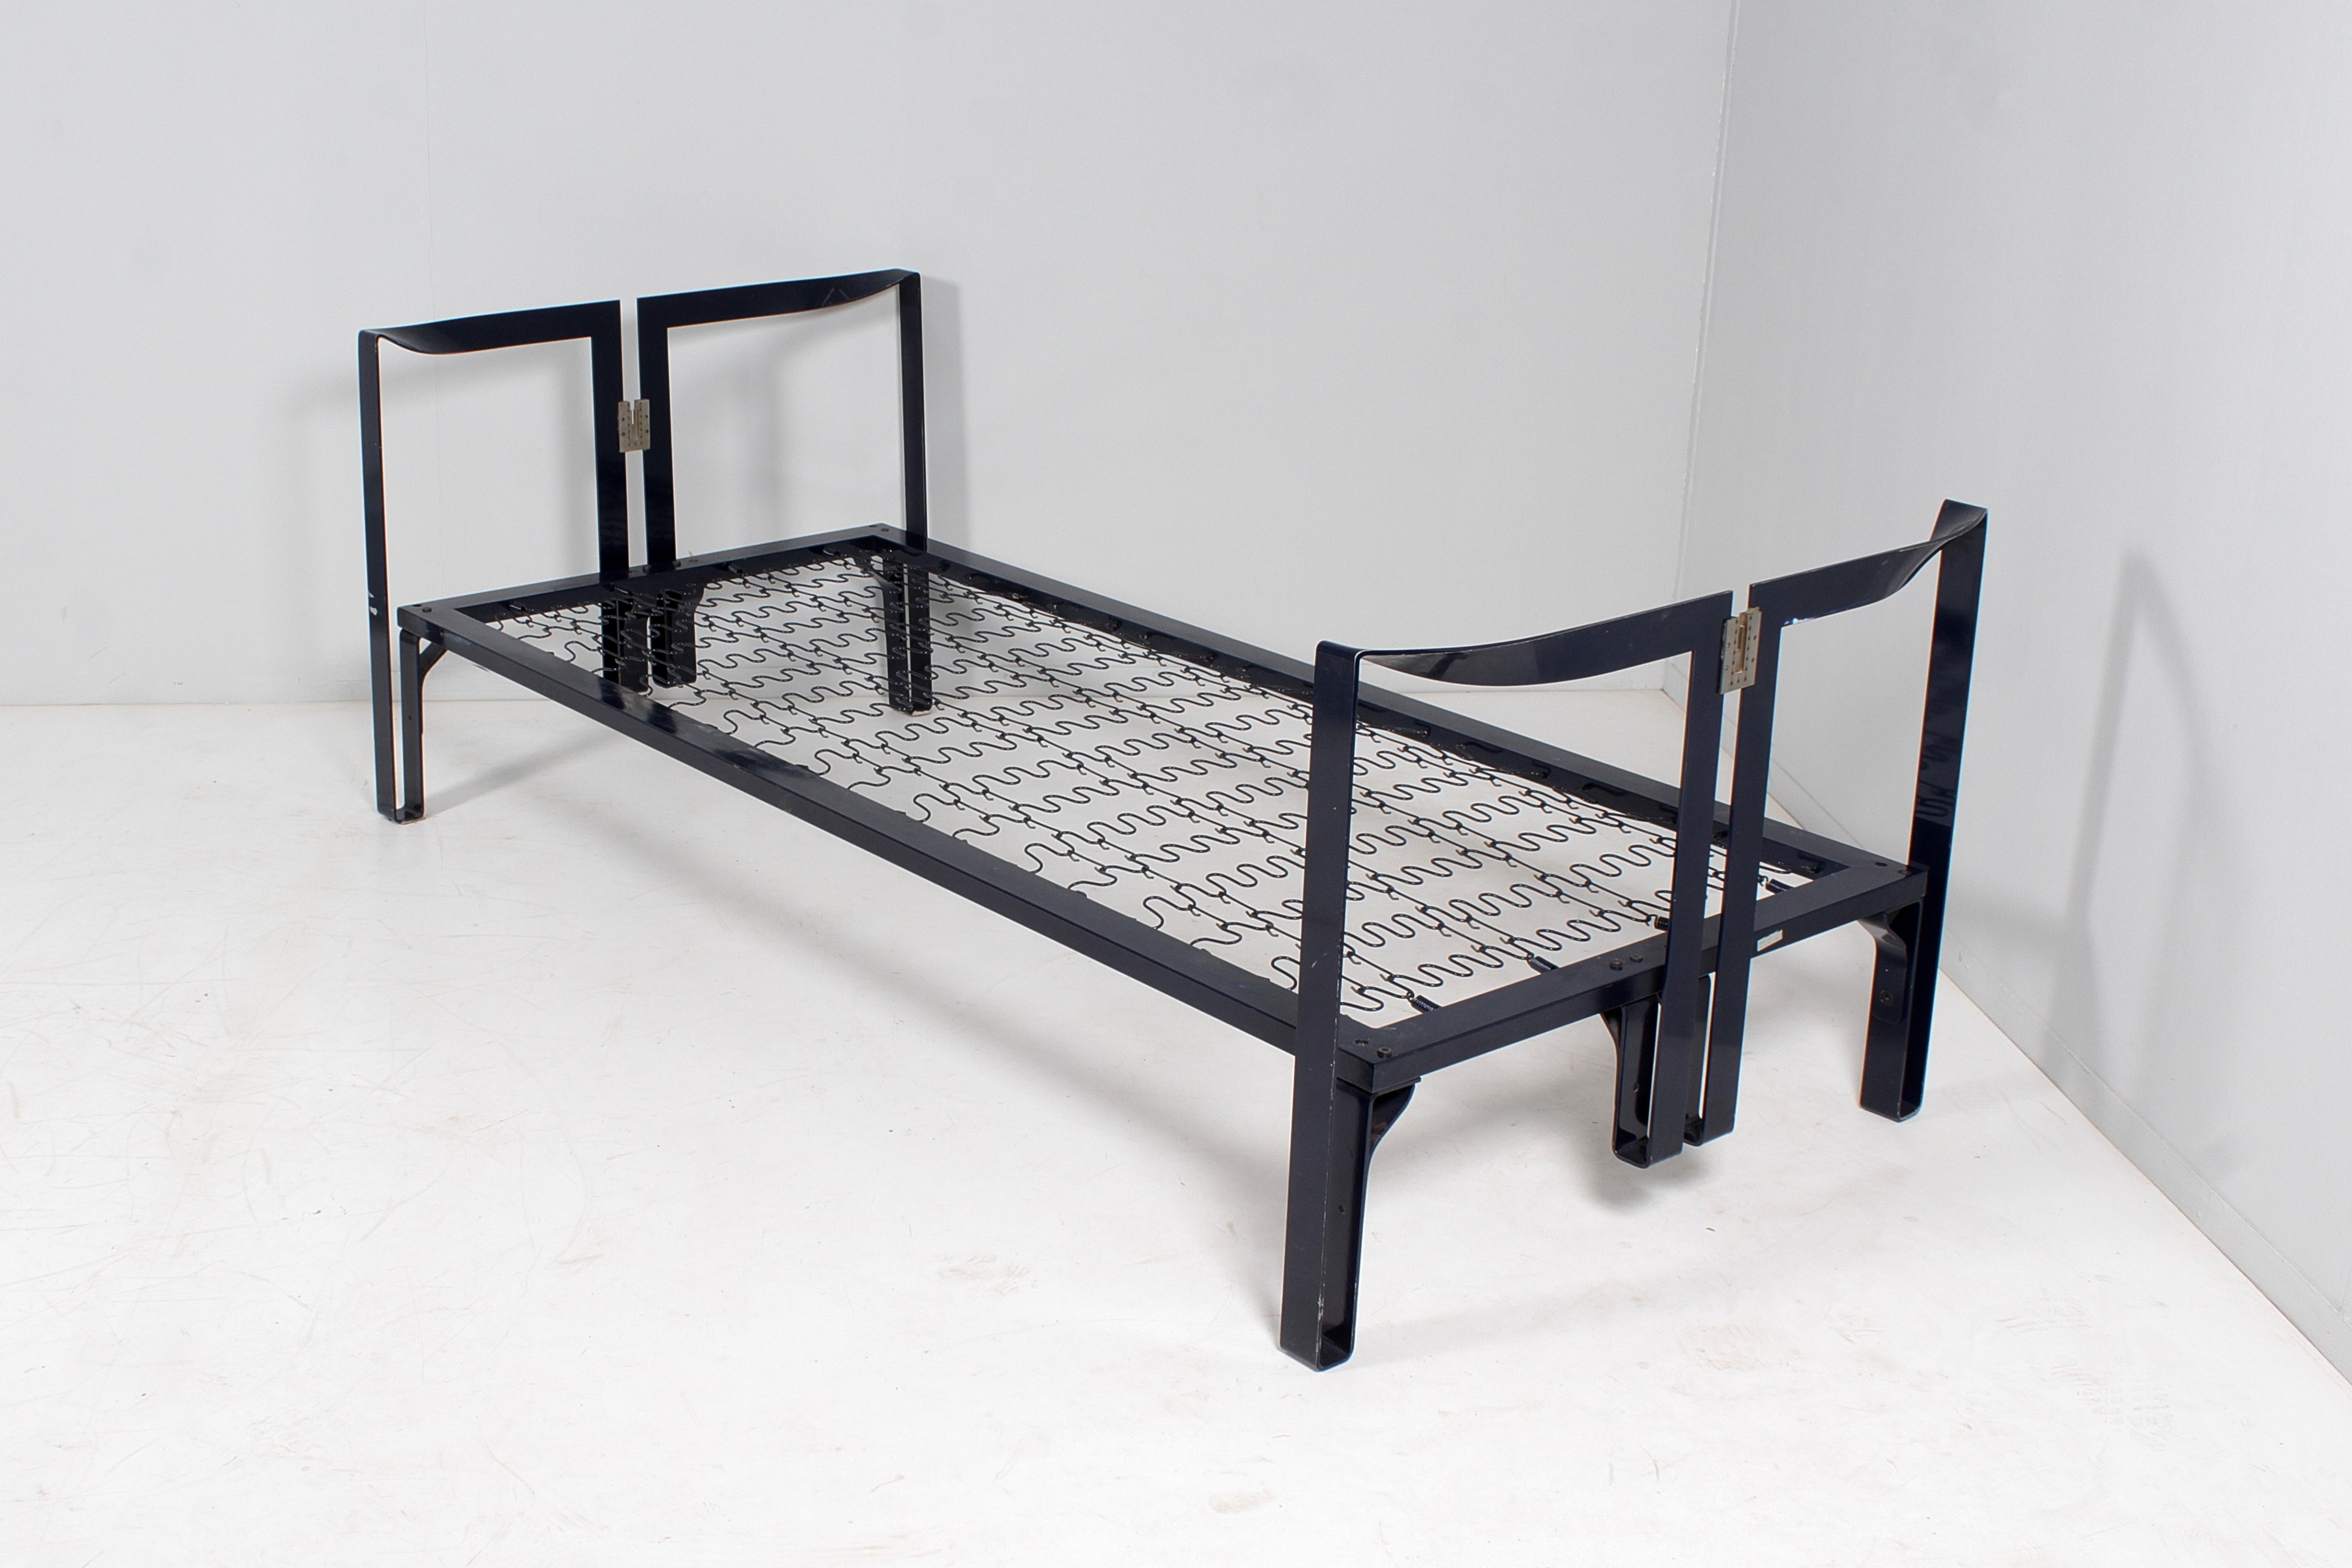 Afra &amp; Tobia Scarpa : 'Vanessa' Bed, published  - Auction Top Design - LTWID Auction House